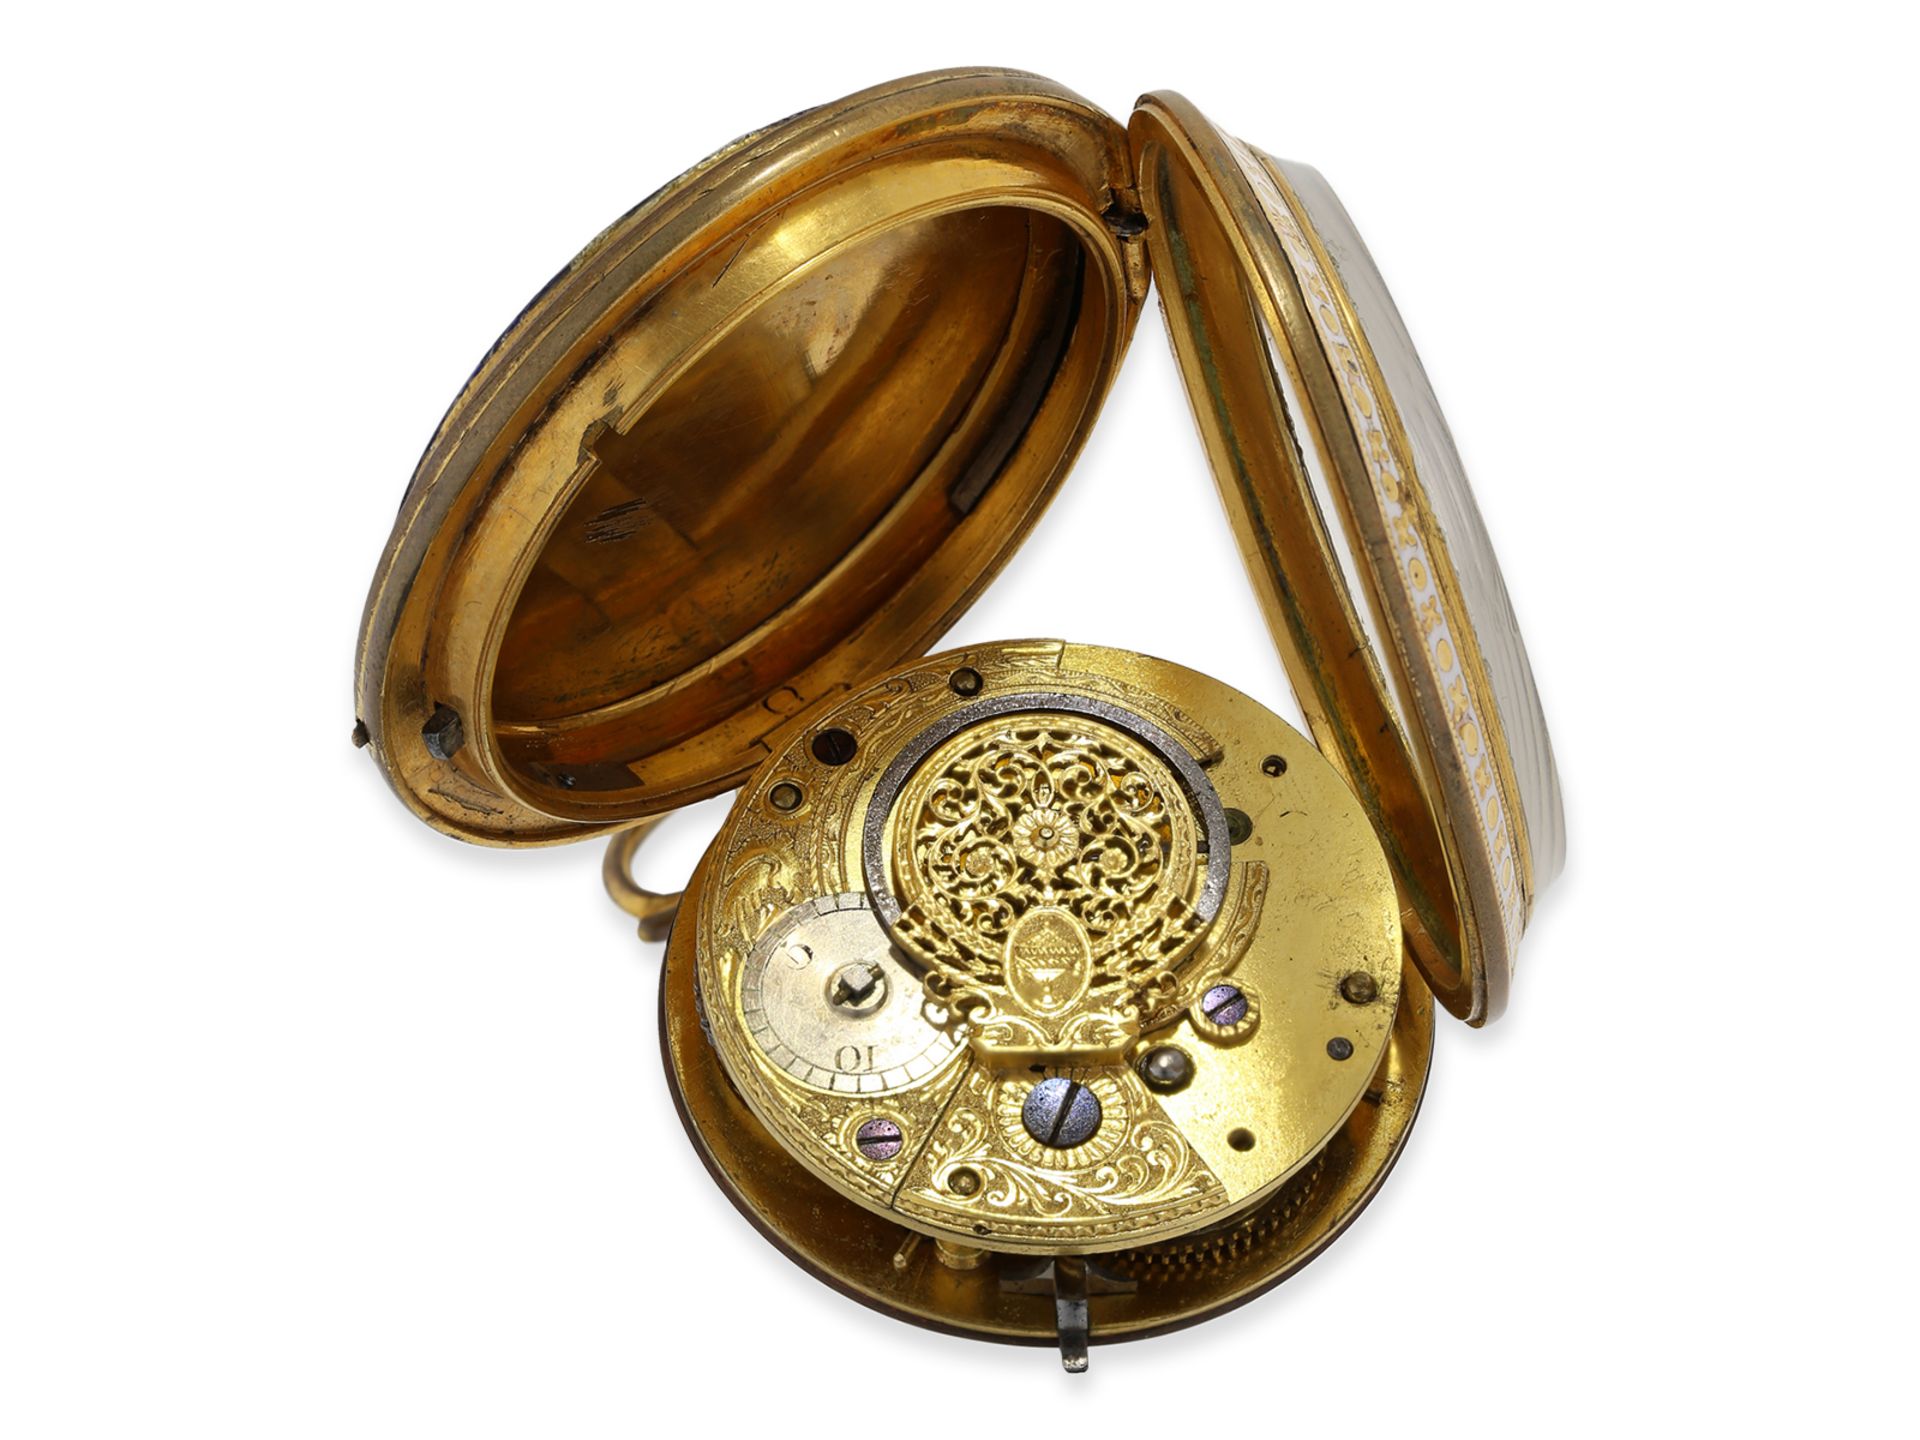 Pocket watch: very attractive large English verge watch with enamel case, ca. 1810 - Image 3 of 3